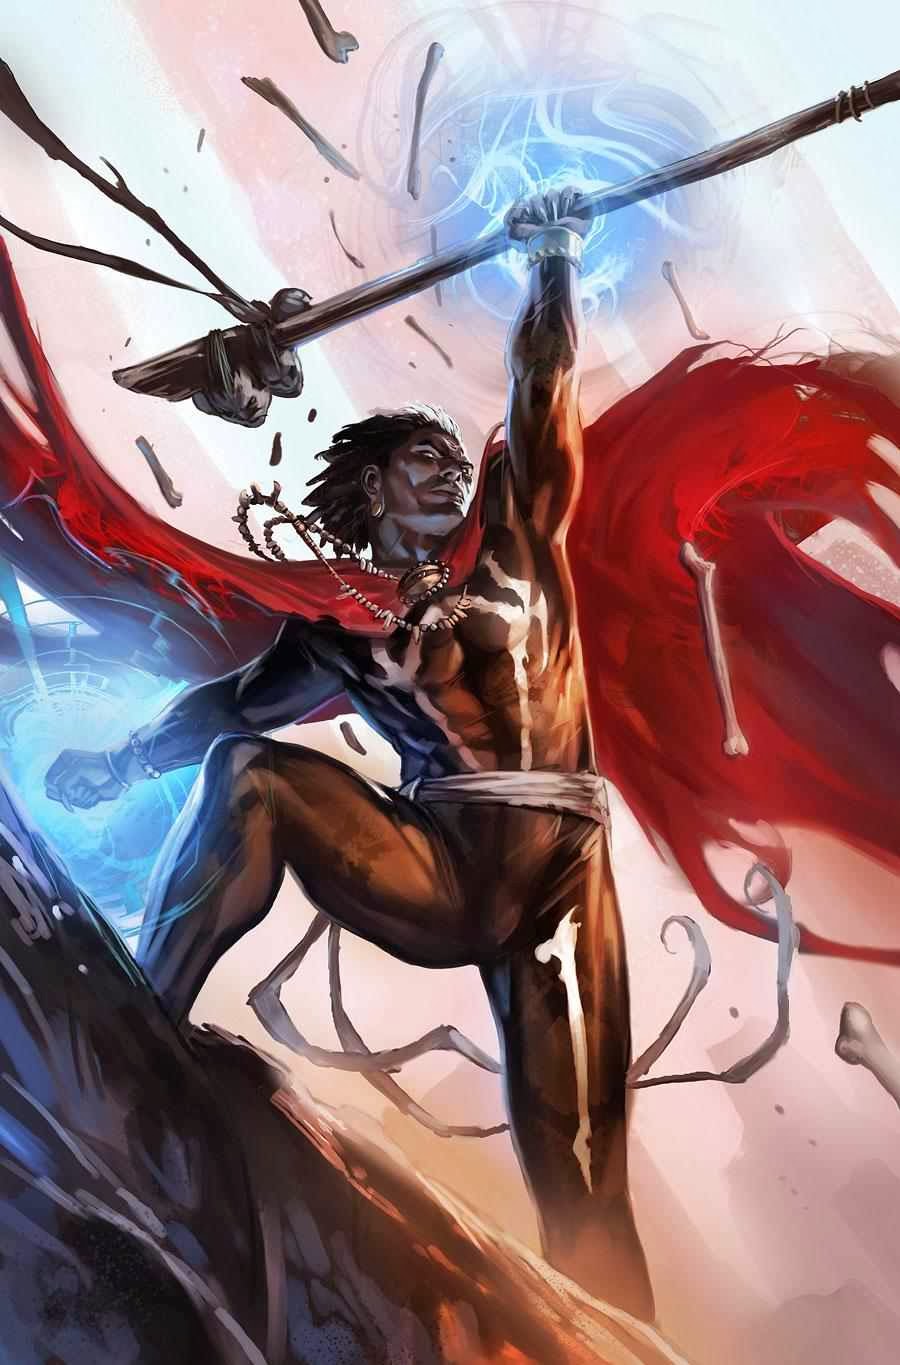 You are currently viewing Notes On A Comic Book – Doctor Voodoo: Avenger Of The Supernatural